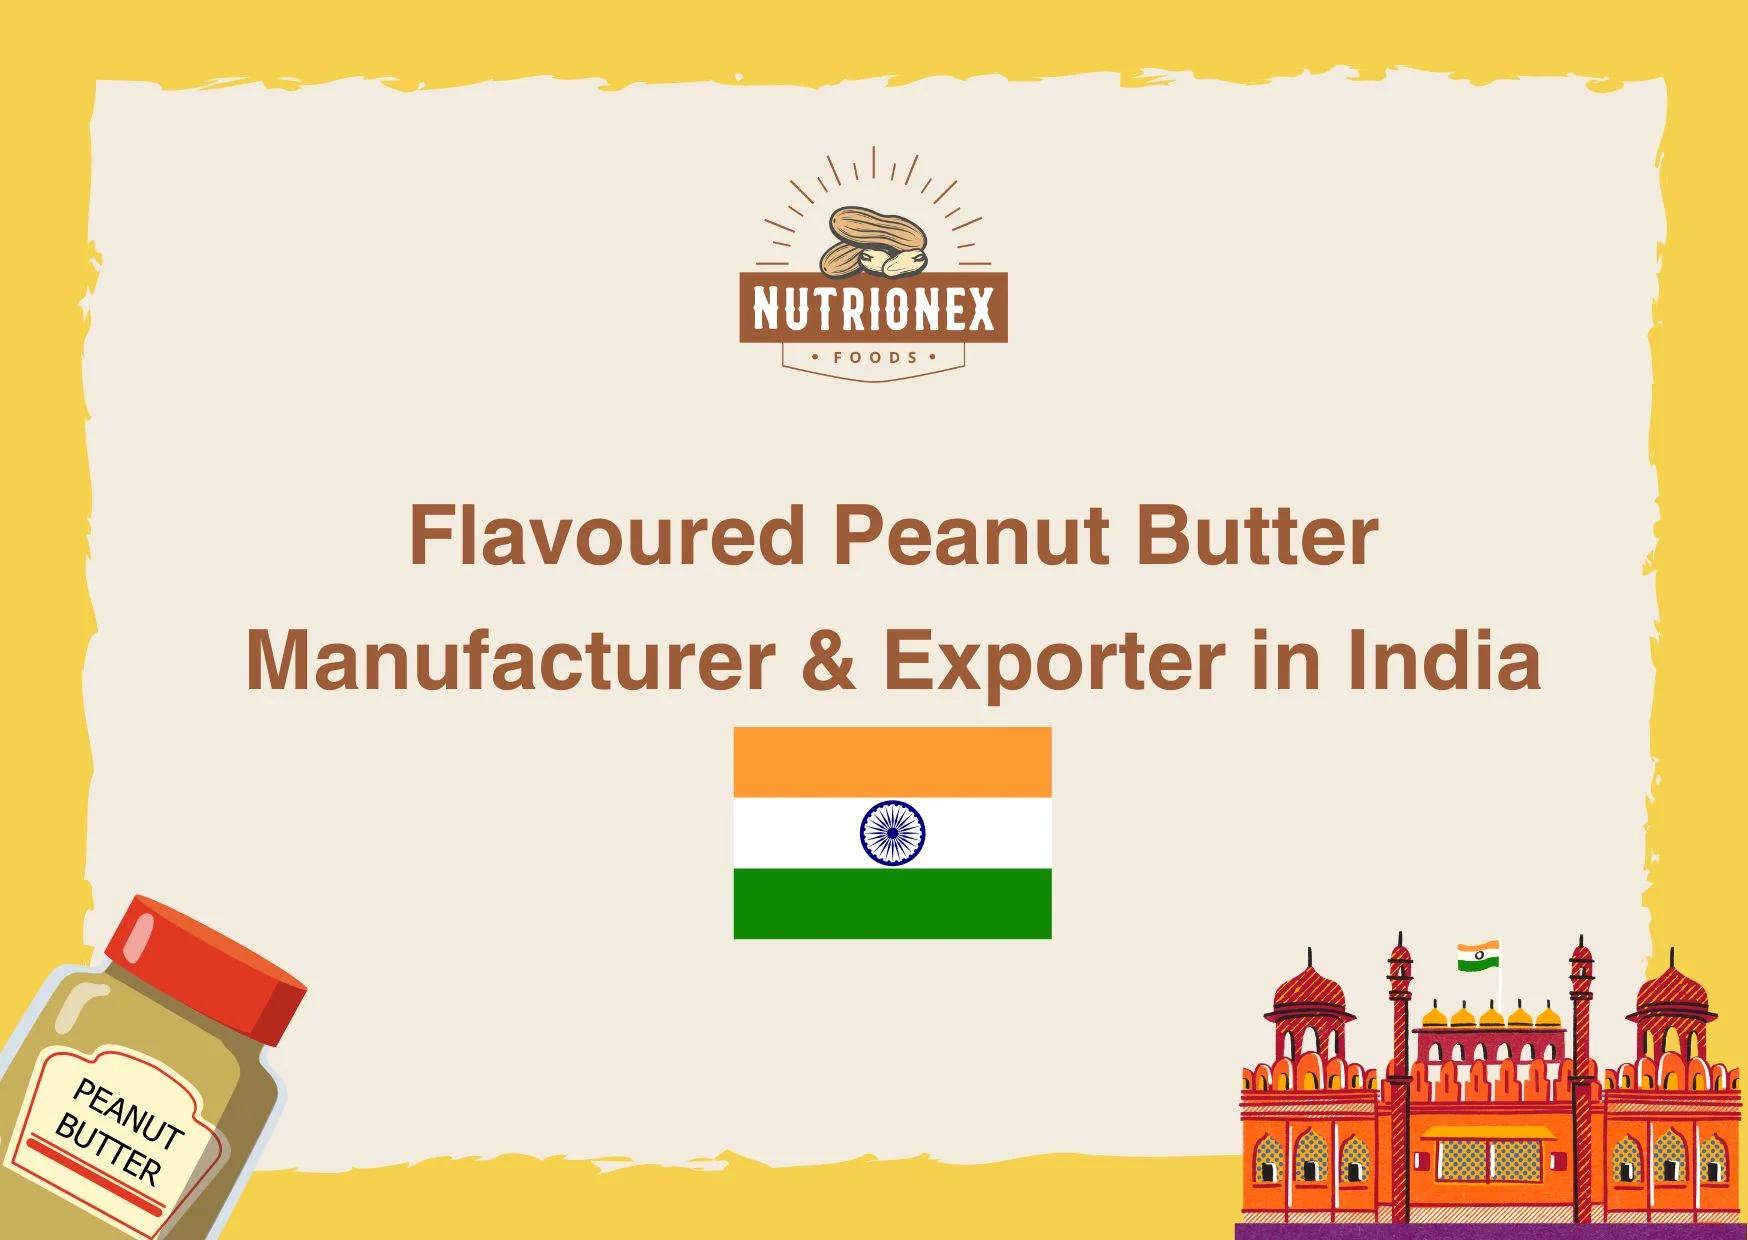 Flavoured Peanut Butter Manufacturer & Exporter In India